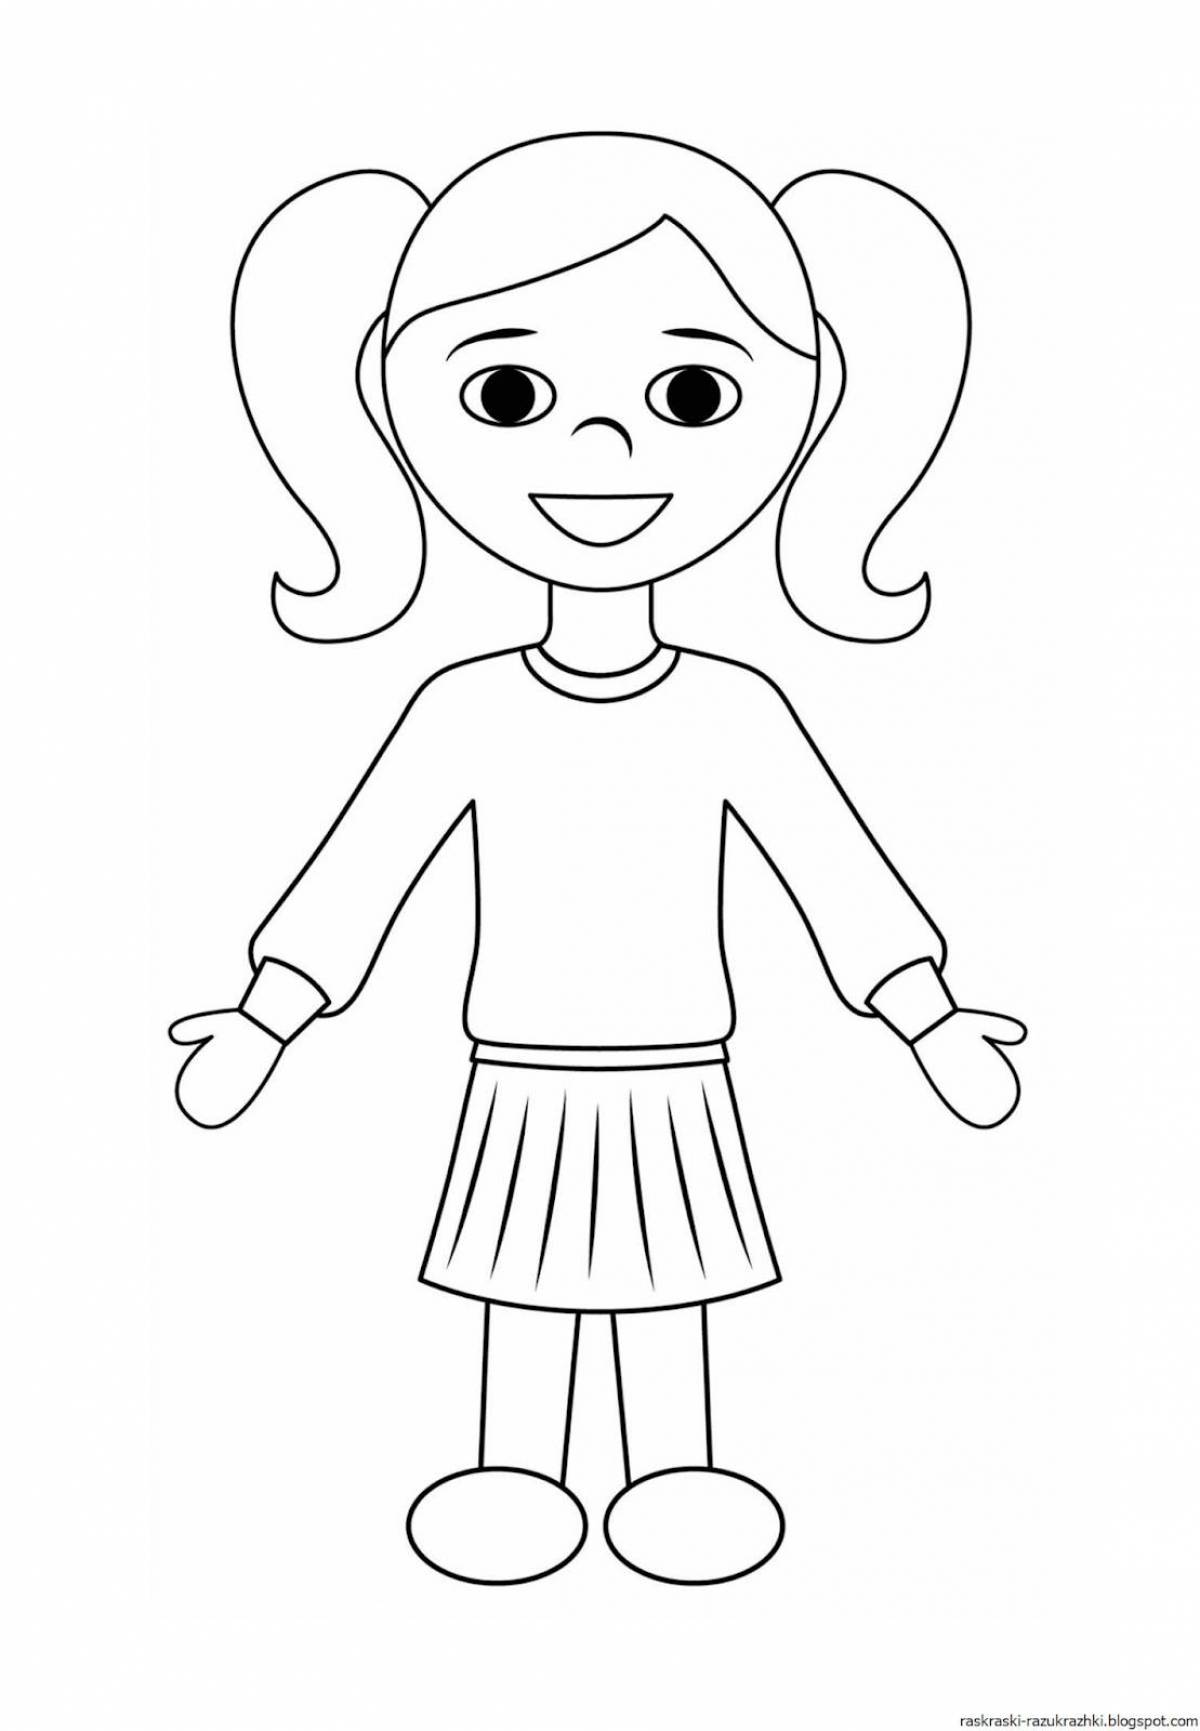 Coloring page with living person for kids